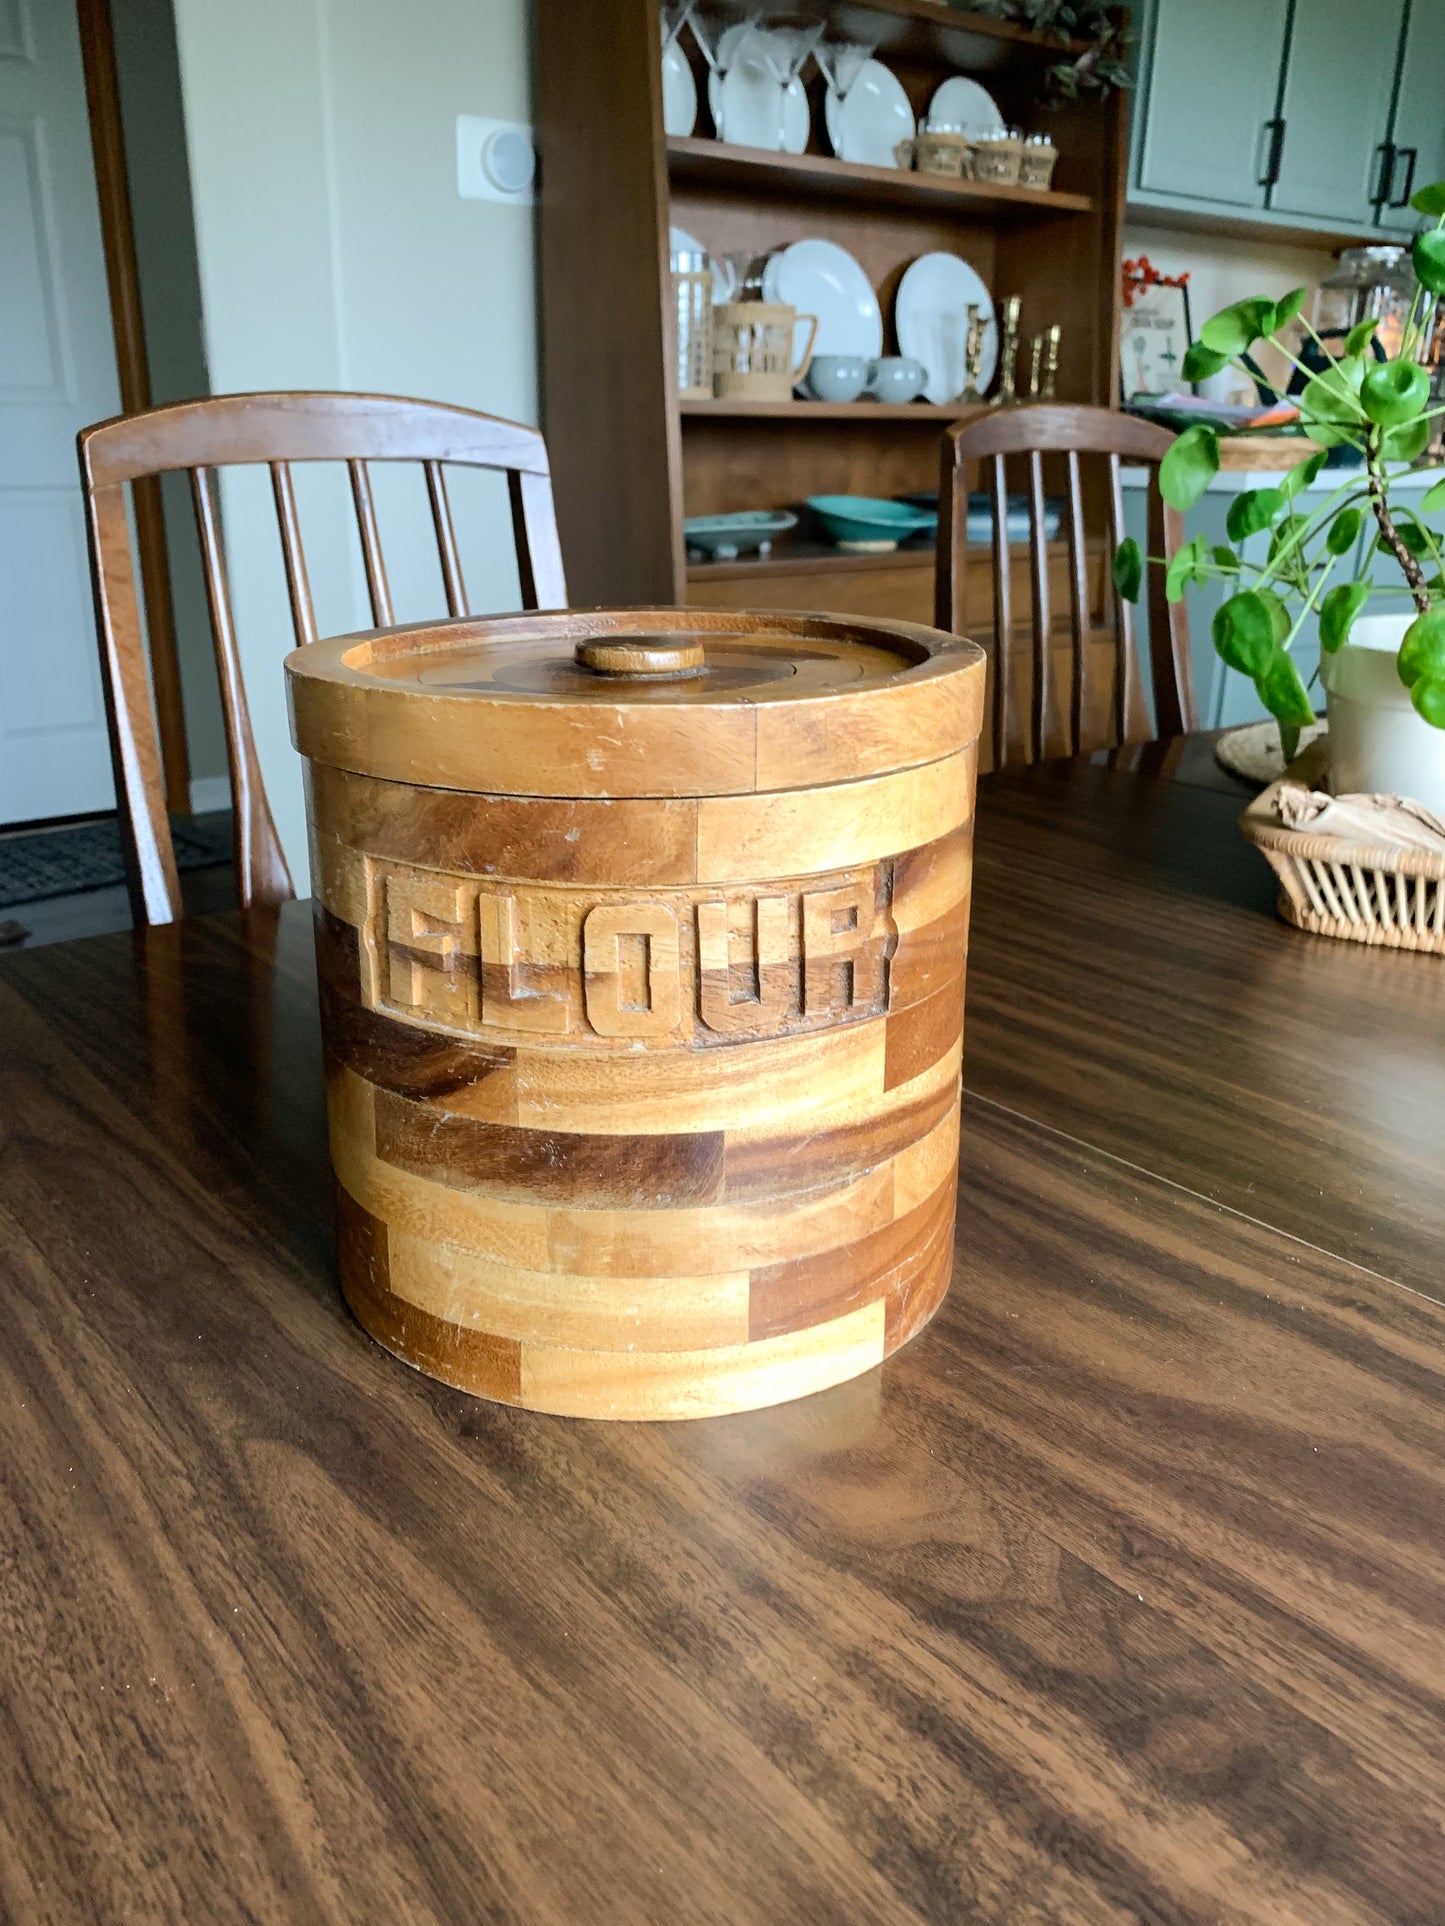 Vintage Wood Flour Canister - Local Olympia Pickup Only